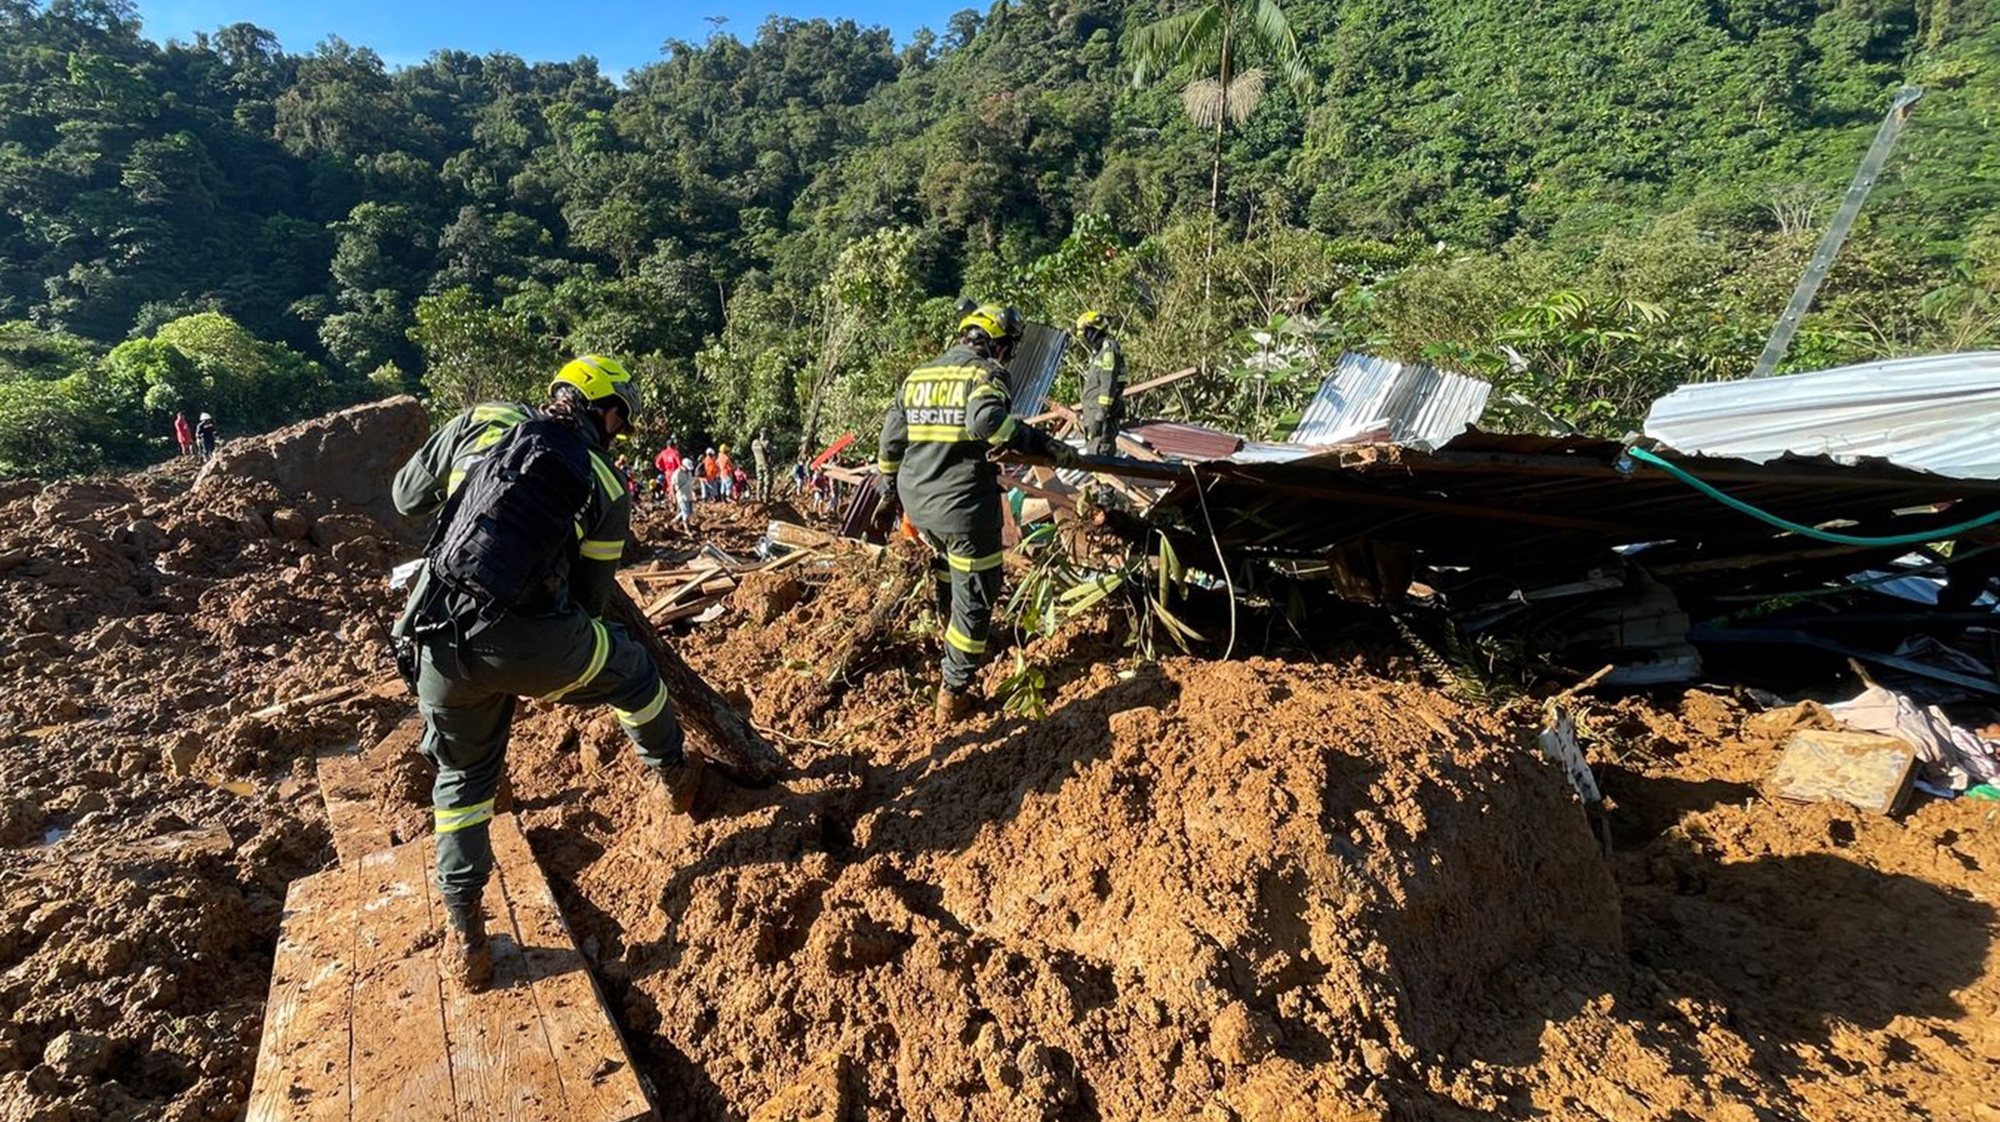 epa11074105 A handout photo made available by the National Police shows rescue workers in the area where a landslide occurred on a road near the town Carmen de Atrato, Choco department, Colombia, 12 January 2024 (issued 13 January 2024). At least 23 people died and 25 others were injured on 12 January in two landslides on a road near the town of Carmen de Atrato, in the western Colombian department of Choco, mayor of Carmen de Atrato, Jaime Herrera, confirmed. The landslide occurred on the road between Medellin and Quibdo, the capital of Choco, apparently caused by a flood, and buried several vehicles.  EPA/NATIONAL POLICE HANDOUT EDITORIAL USE ONLY/NO SALES HANDOUT EDITORIAL USE ONLY/NO SALES HANDOUT EDITORIAL USE ONLY/NO SALES